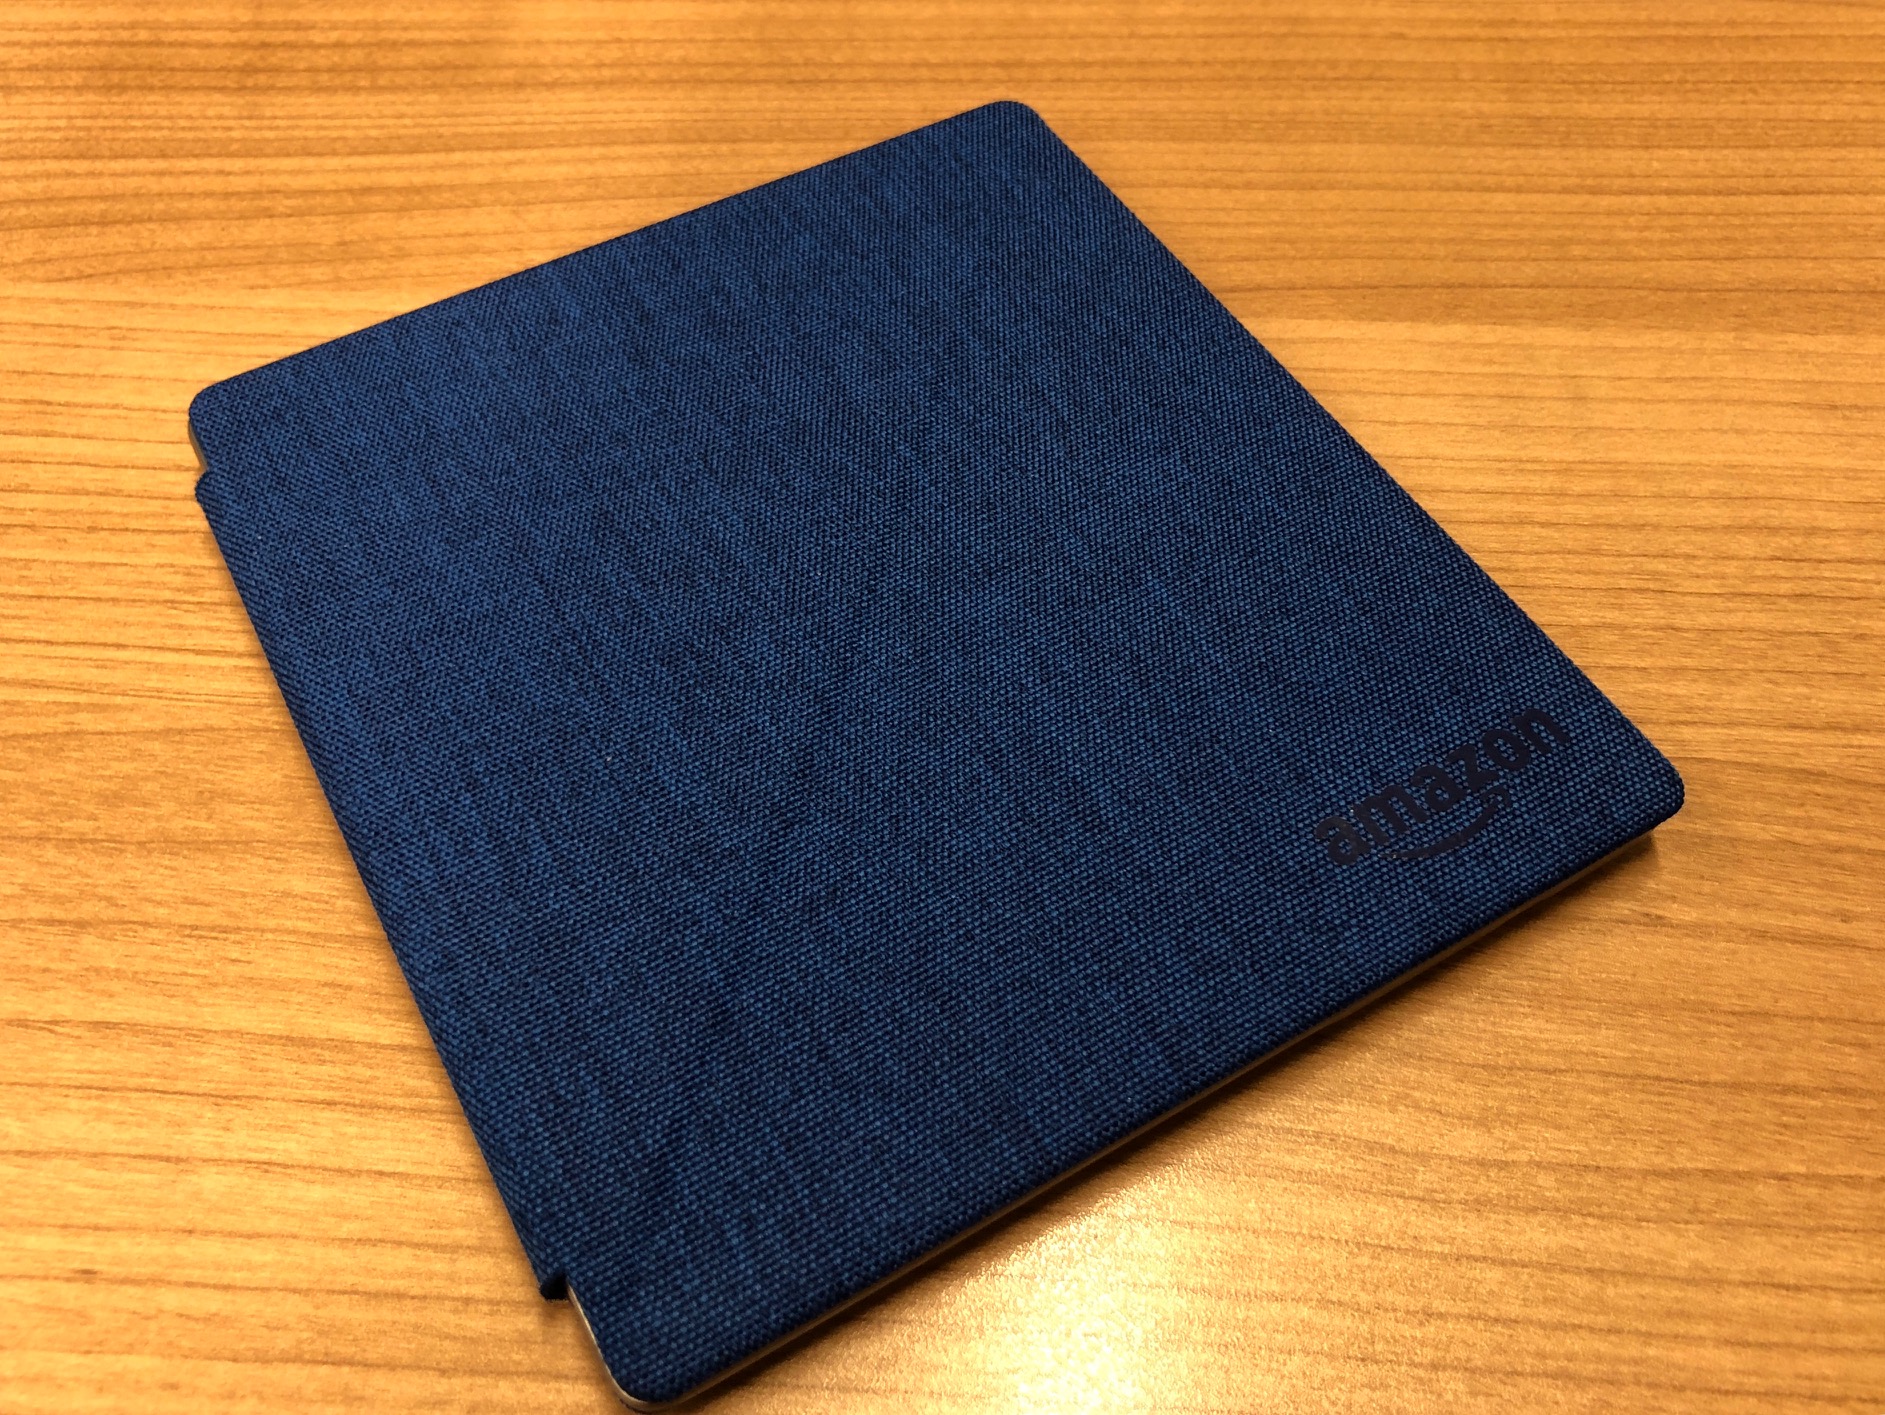 The Kindle Oasis cover